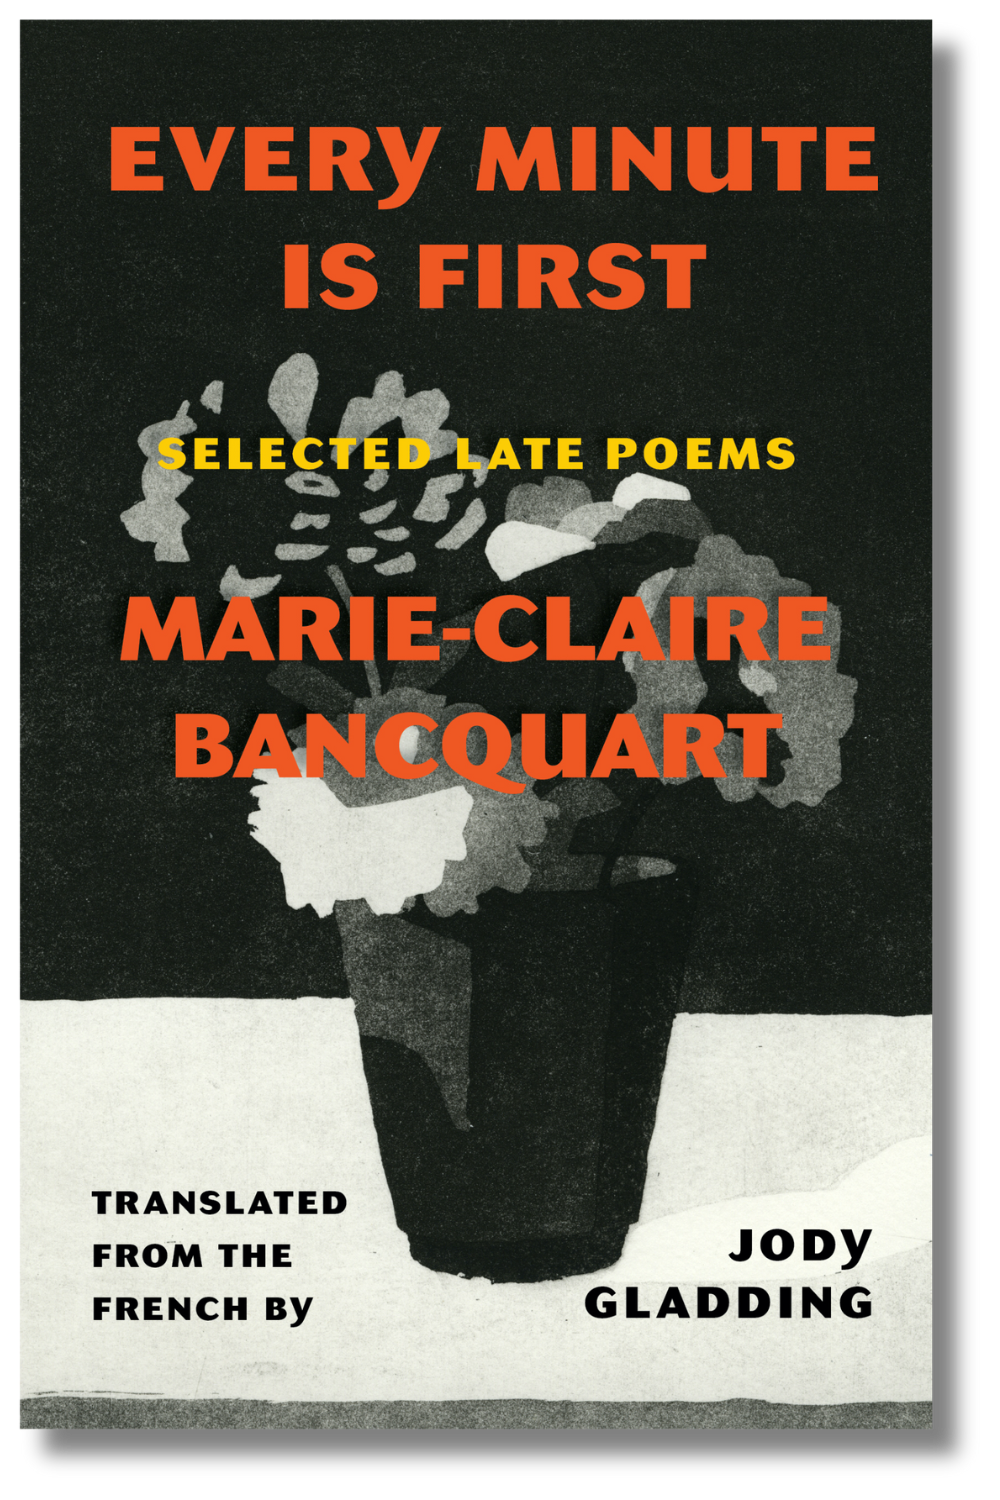 The cover of "Every Minute Is First" by Marie-Claire Bancquart, tr. by Jody Gladding